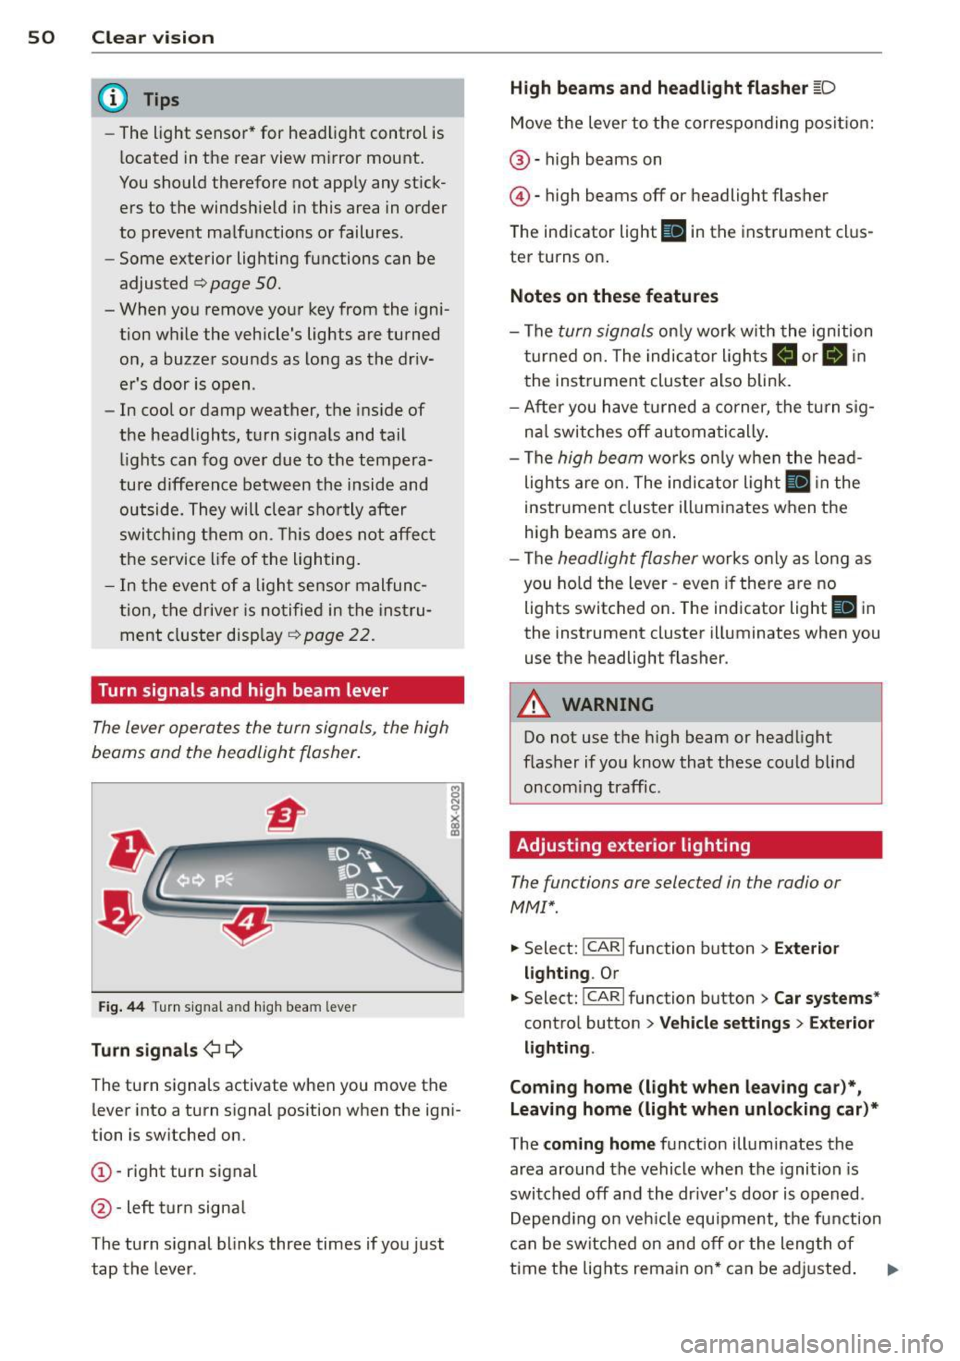 AUDI S4 2015  Owners Manual 50  Clear vis ion 
@ Tips 
- The  light  sensor*  for  headlight  control  is 
located  in the  rear  view  m irror  mount. 
You should  therefore  not  apply  any  st ick­
ers  to  the  windsh ield 